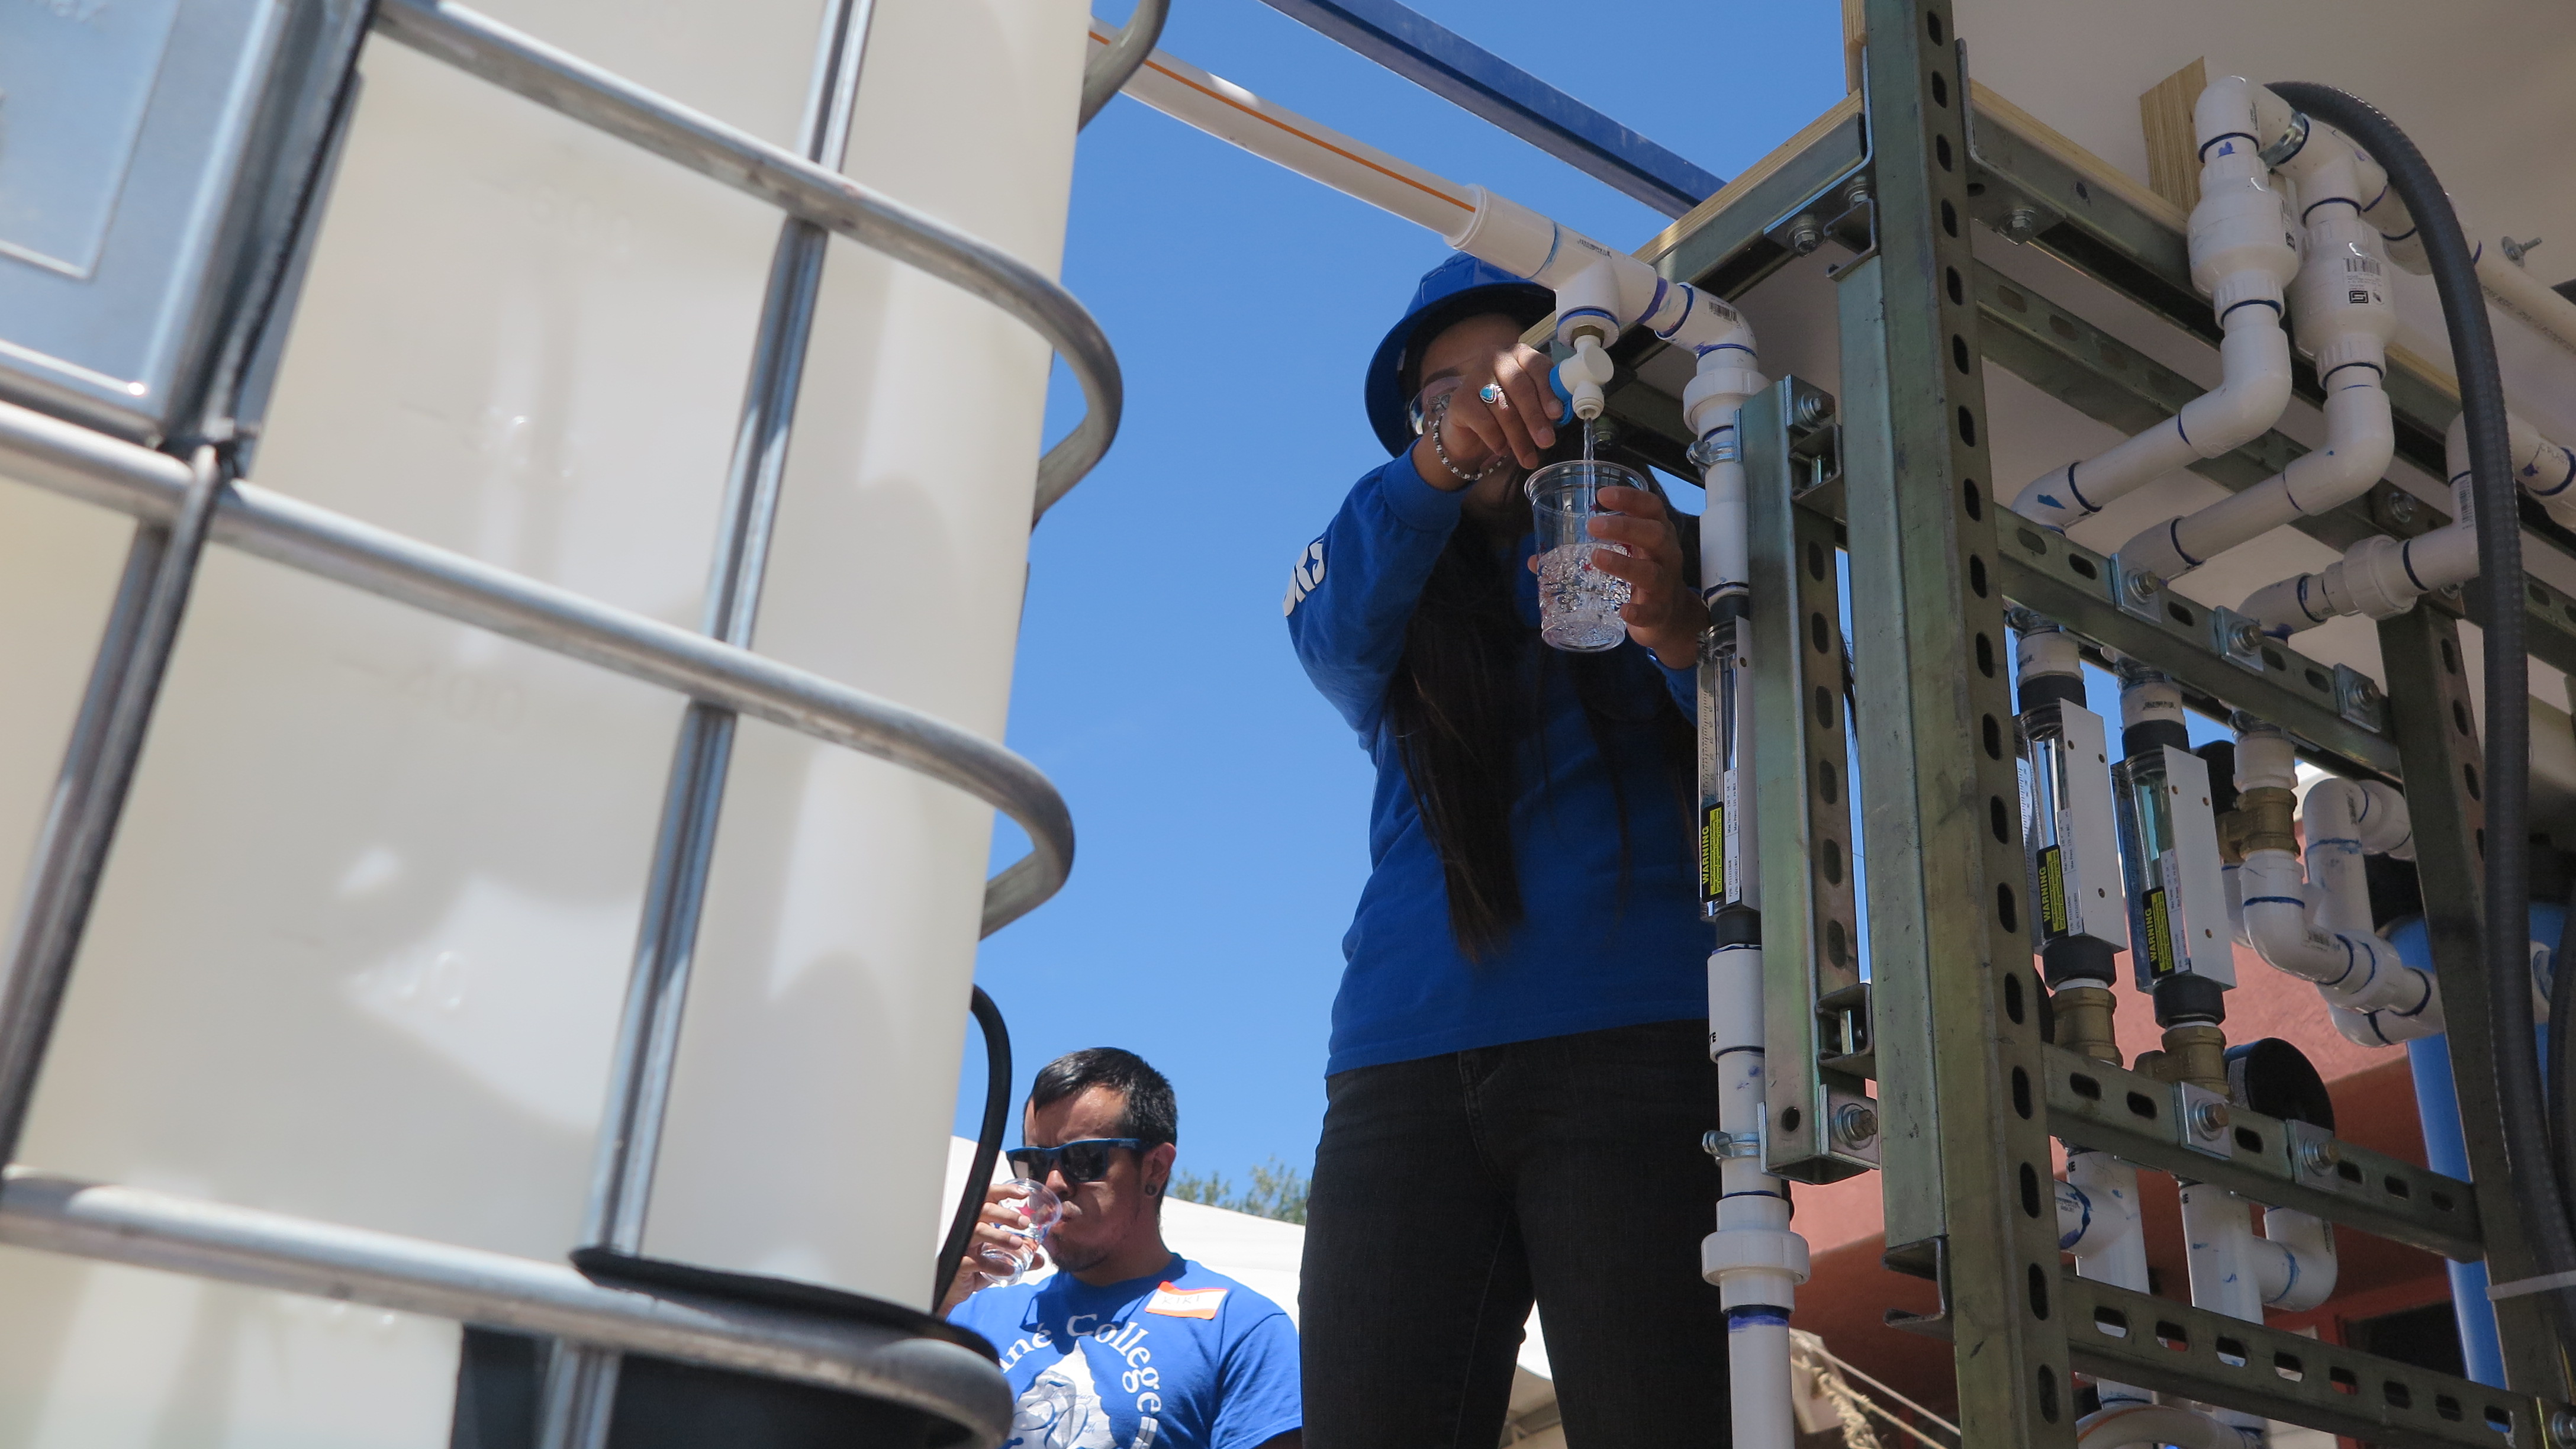 A Diné College student demonstrates use of the water filtration system.